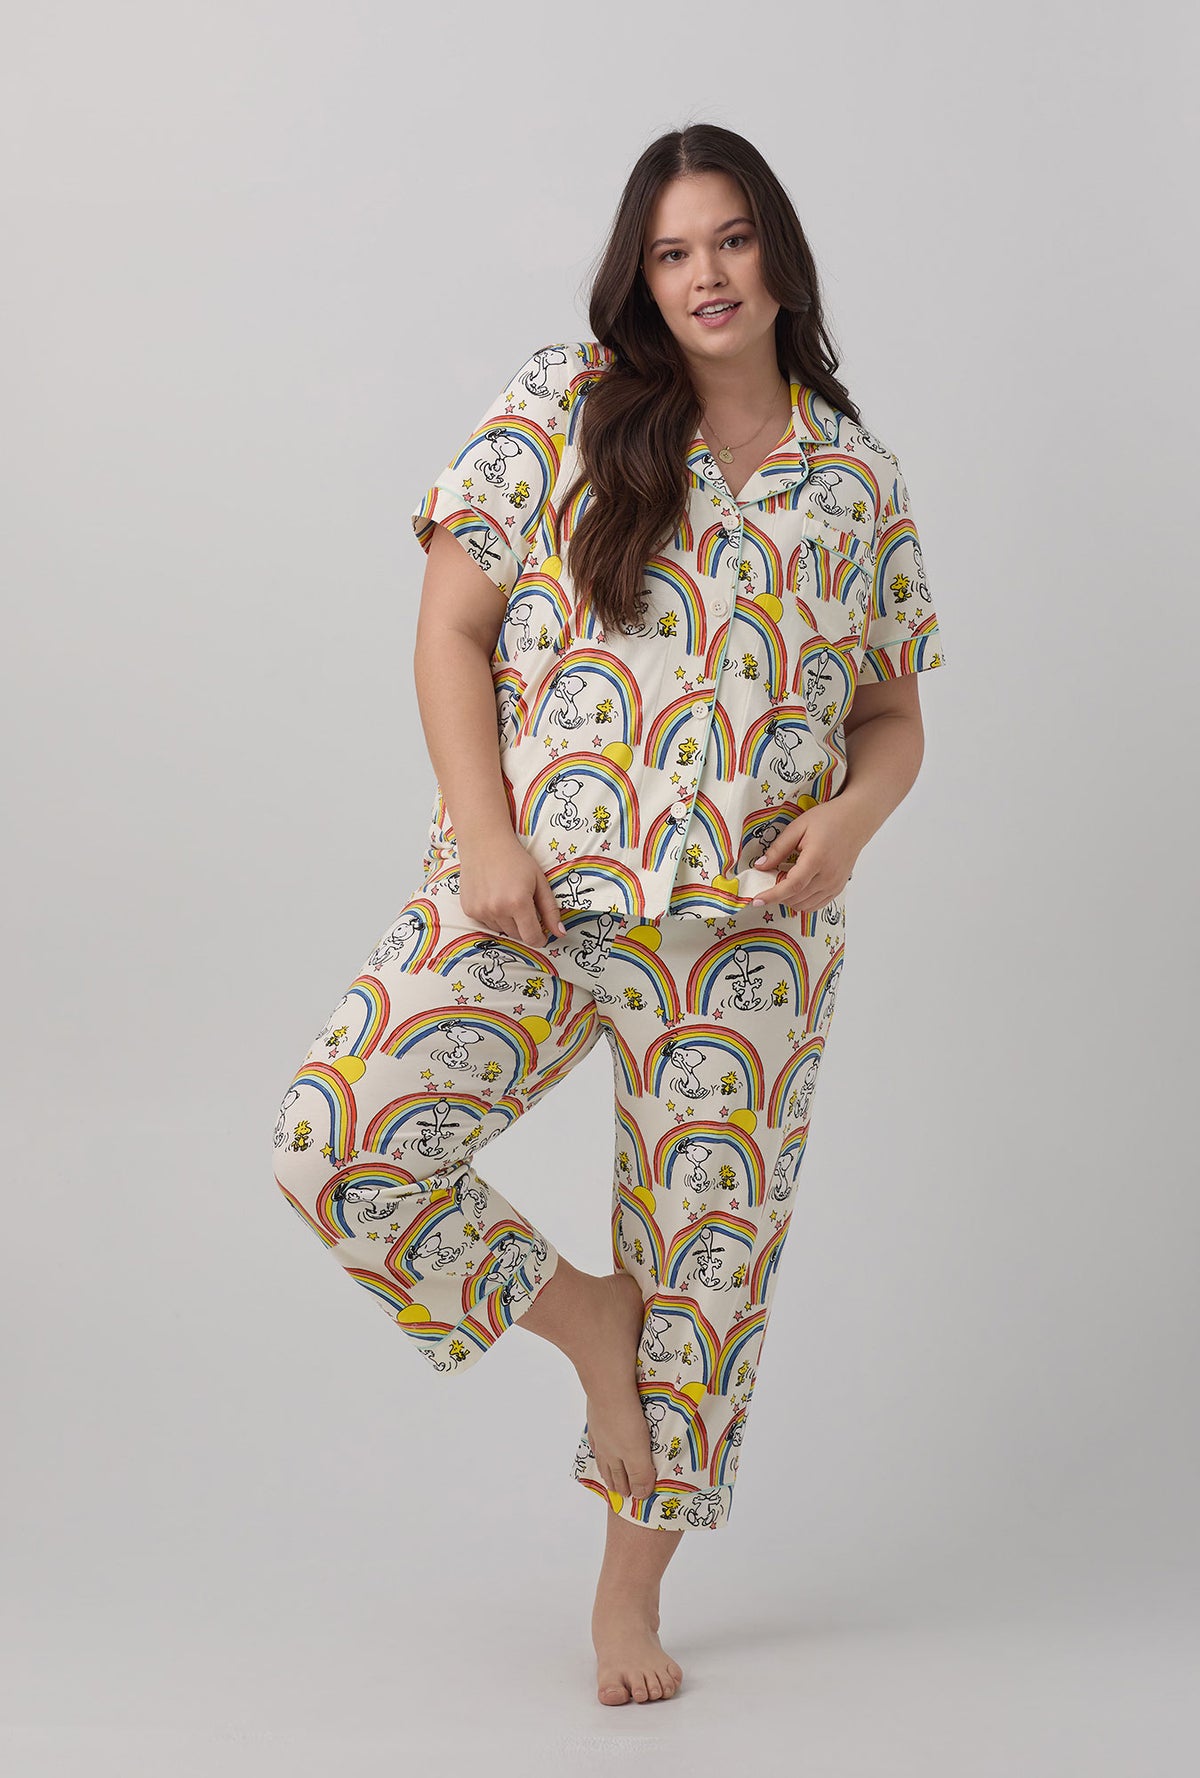 A lady wearing  plus size white Short Sleeve Classic Stretch Jersey Cropped PJ Set  with Sunshine Snoopy print.